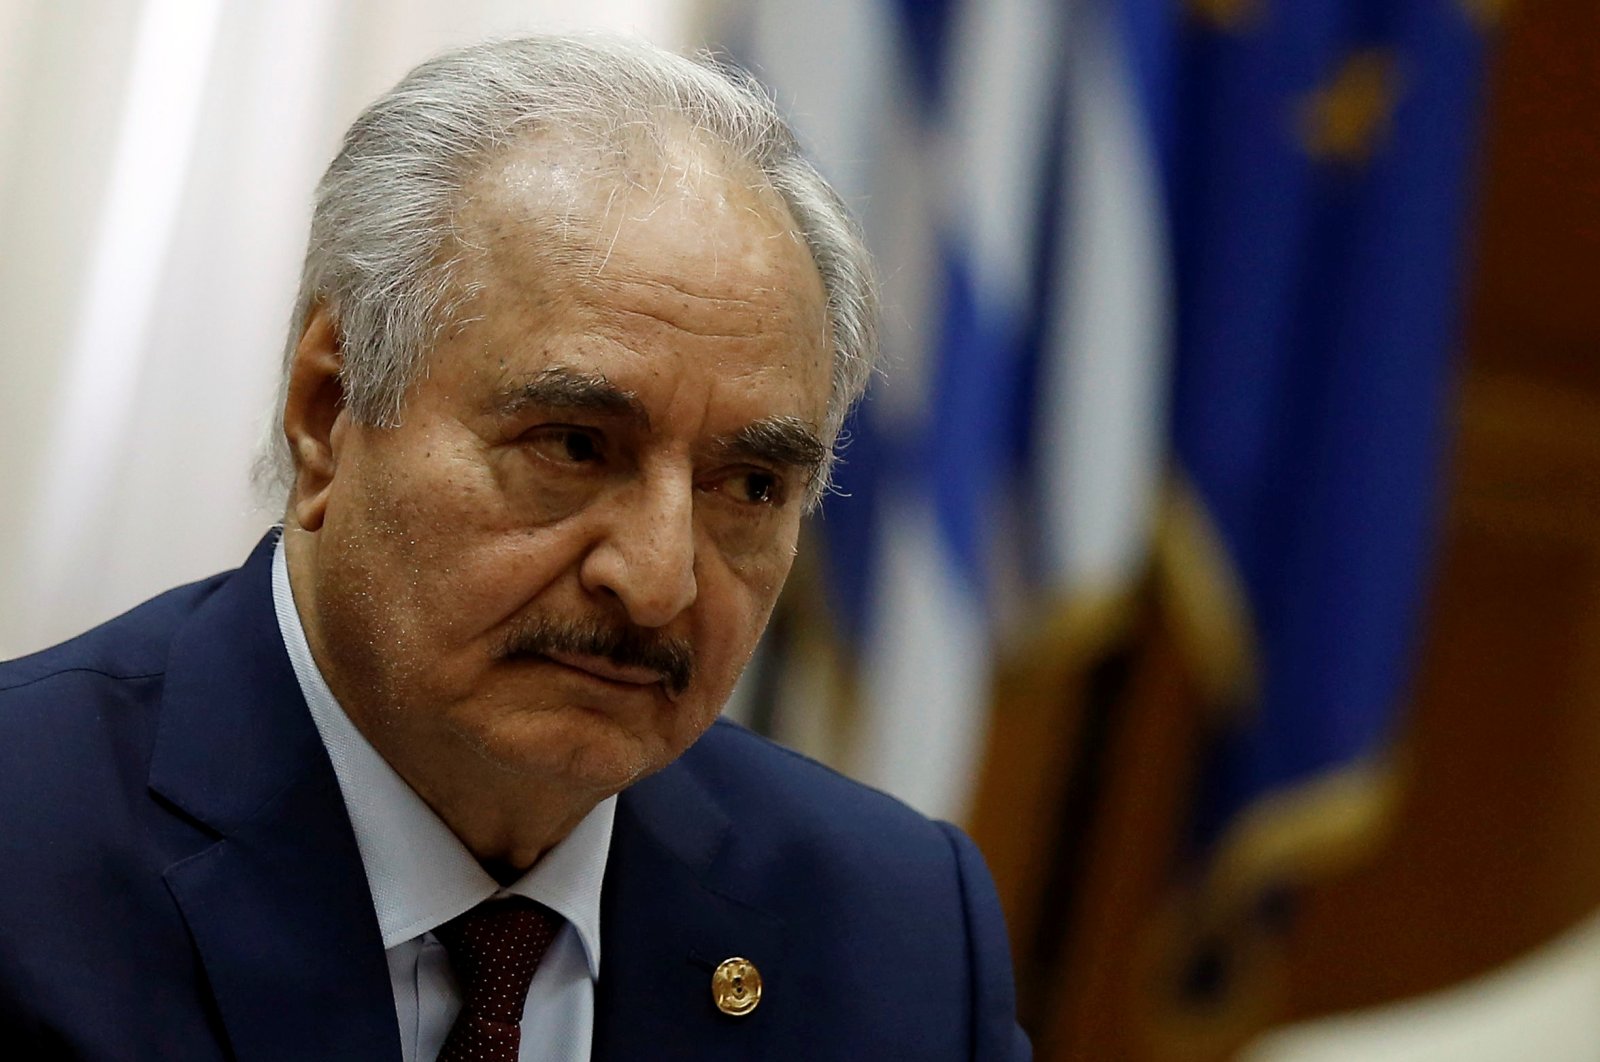 Libyan putschist Gen. Khalifa Haftar meets with Greek Prime Minister Kyriakos Mitsotakis (not pictured) at Parliament in Athens, Greece, Jan. 17, 2020. (Reuters File Photo)